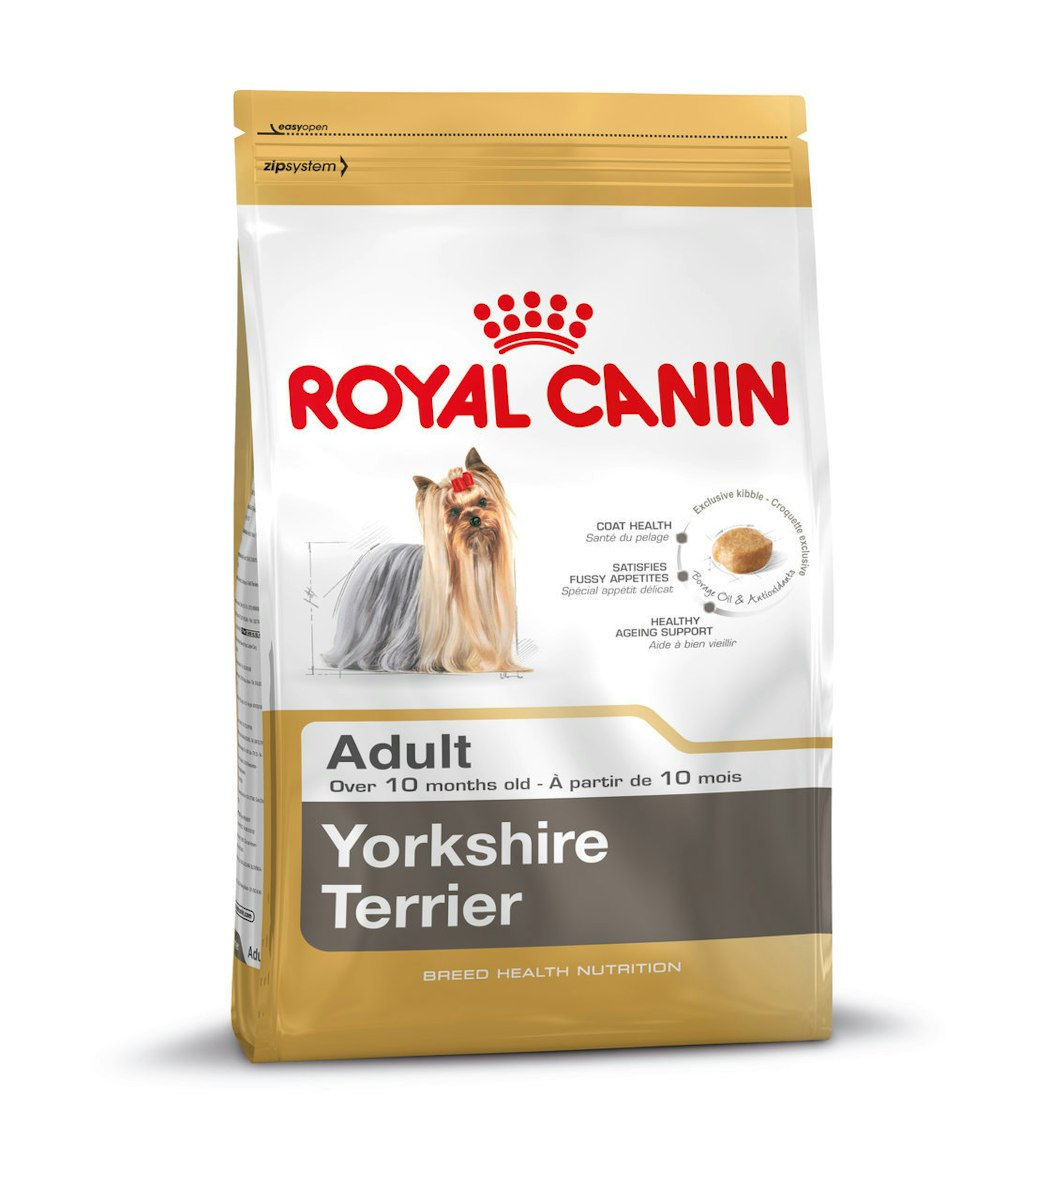 ROYAL CANIN BHN Small Breed Yorkshire Terrier Adult Hundetrockenfutter von Royal Canin